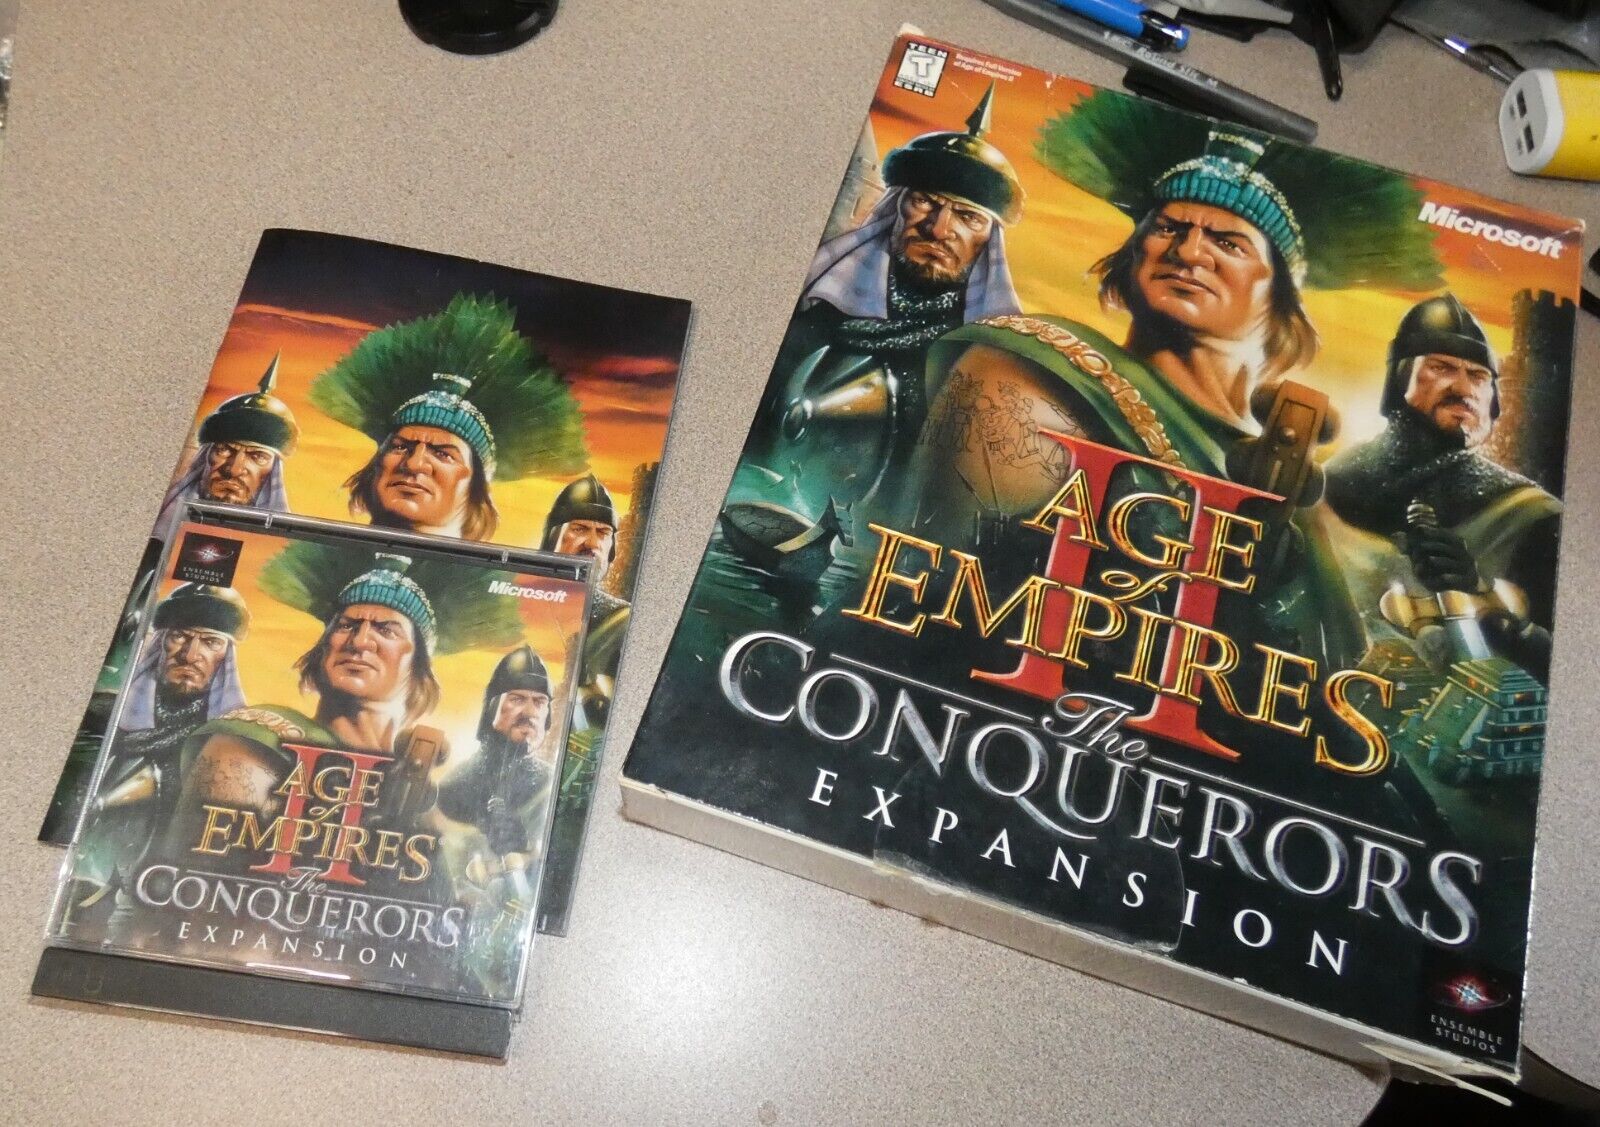 Age of Empires 2 w/Conquerors Expansion Box Microsoft vintage game 2000 RTS